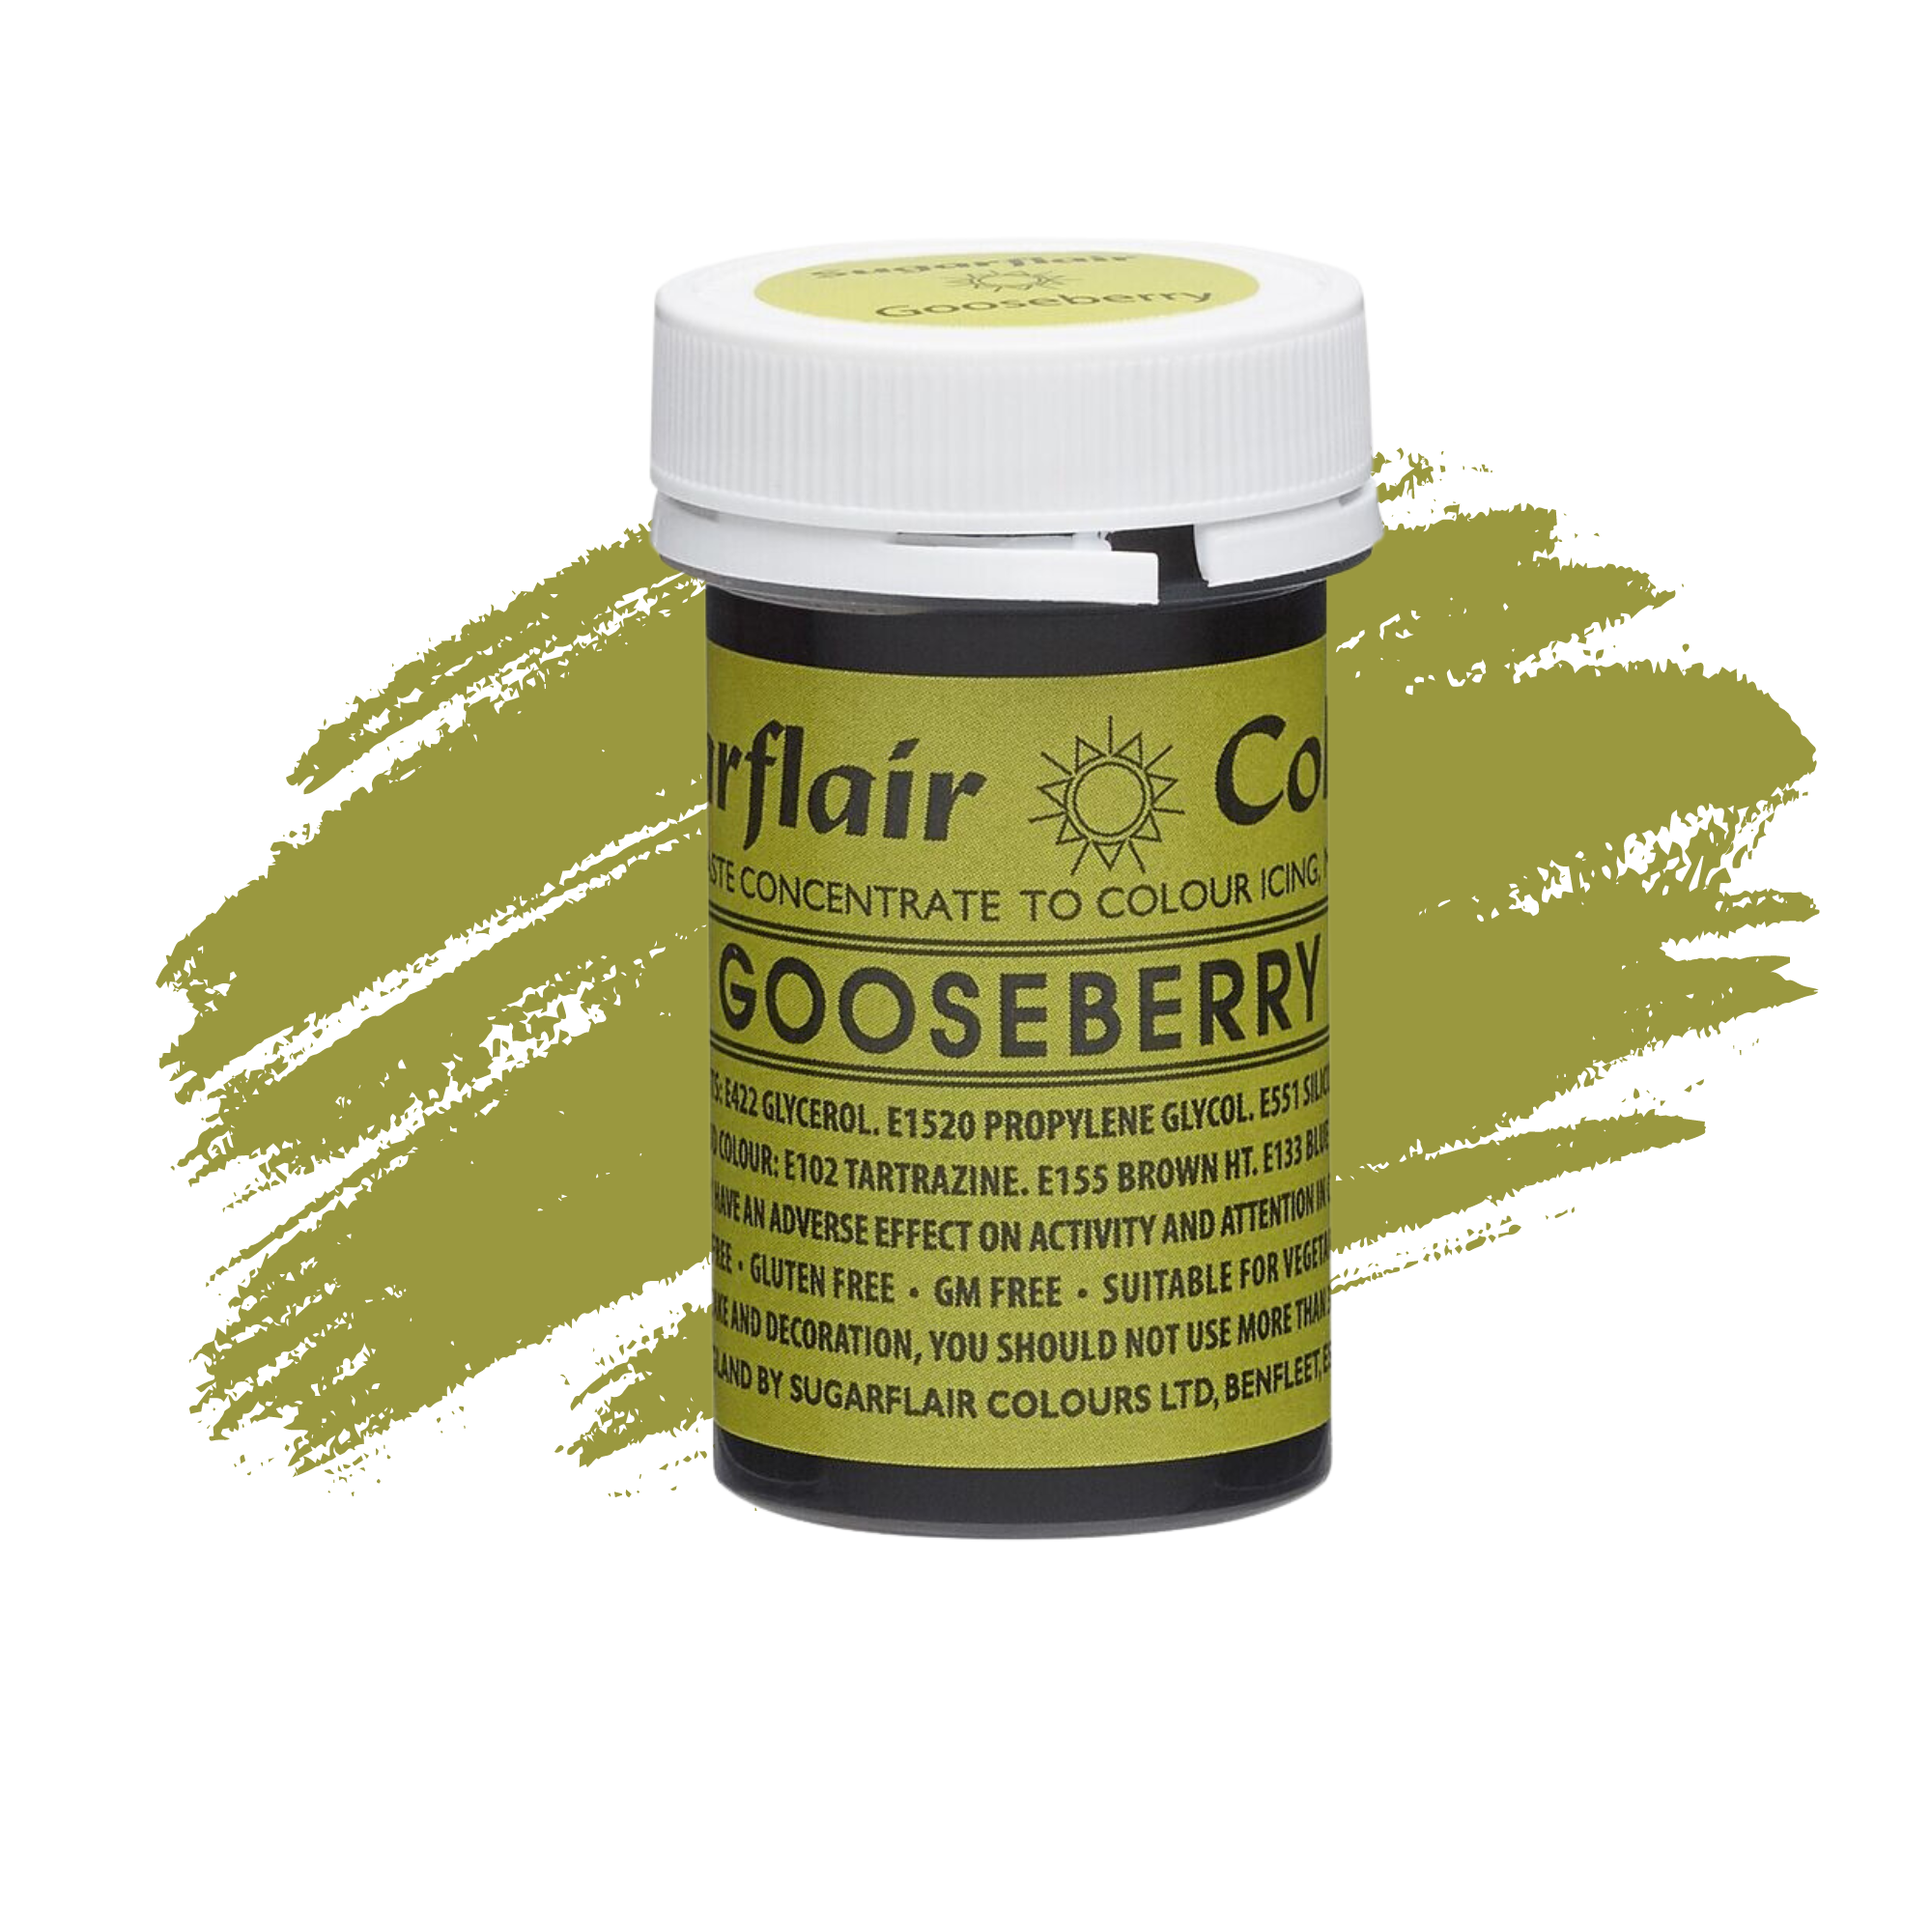 Sugarflair Paste Colours Concentrated Food Colouring - Spectral Gooseberry - 25g